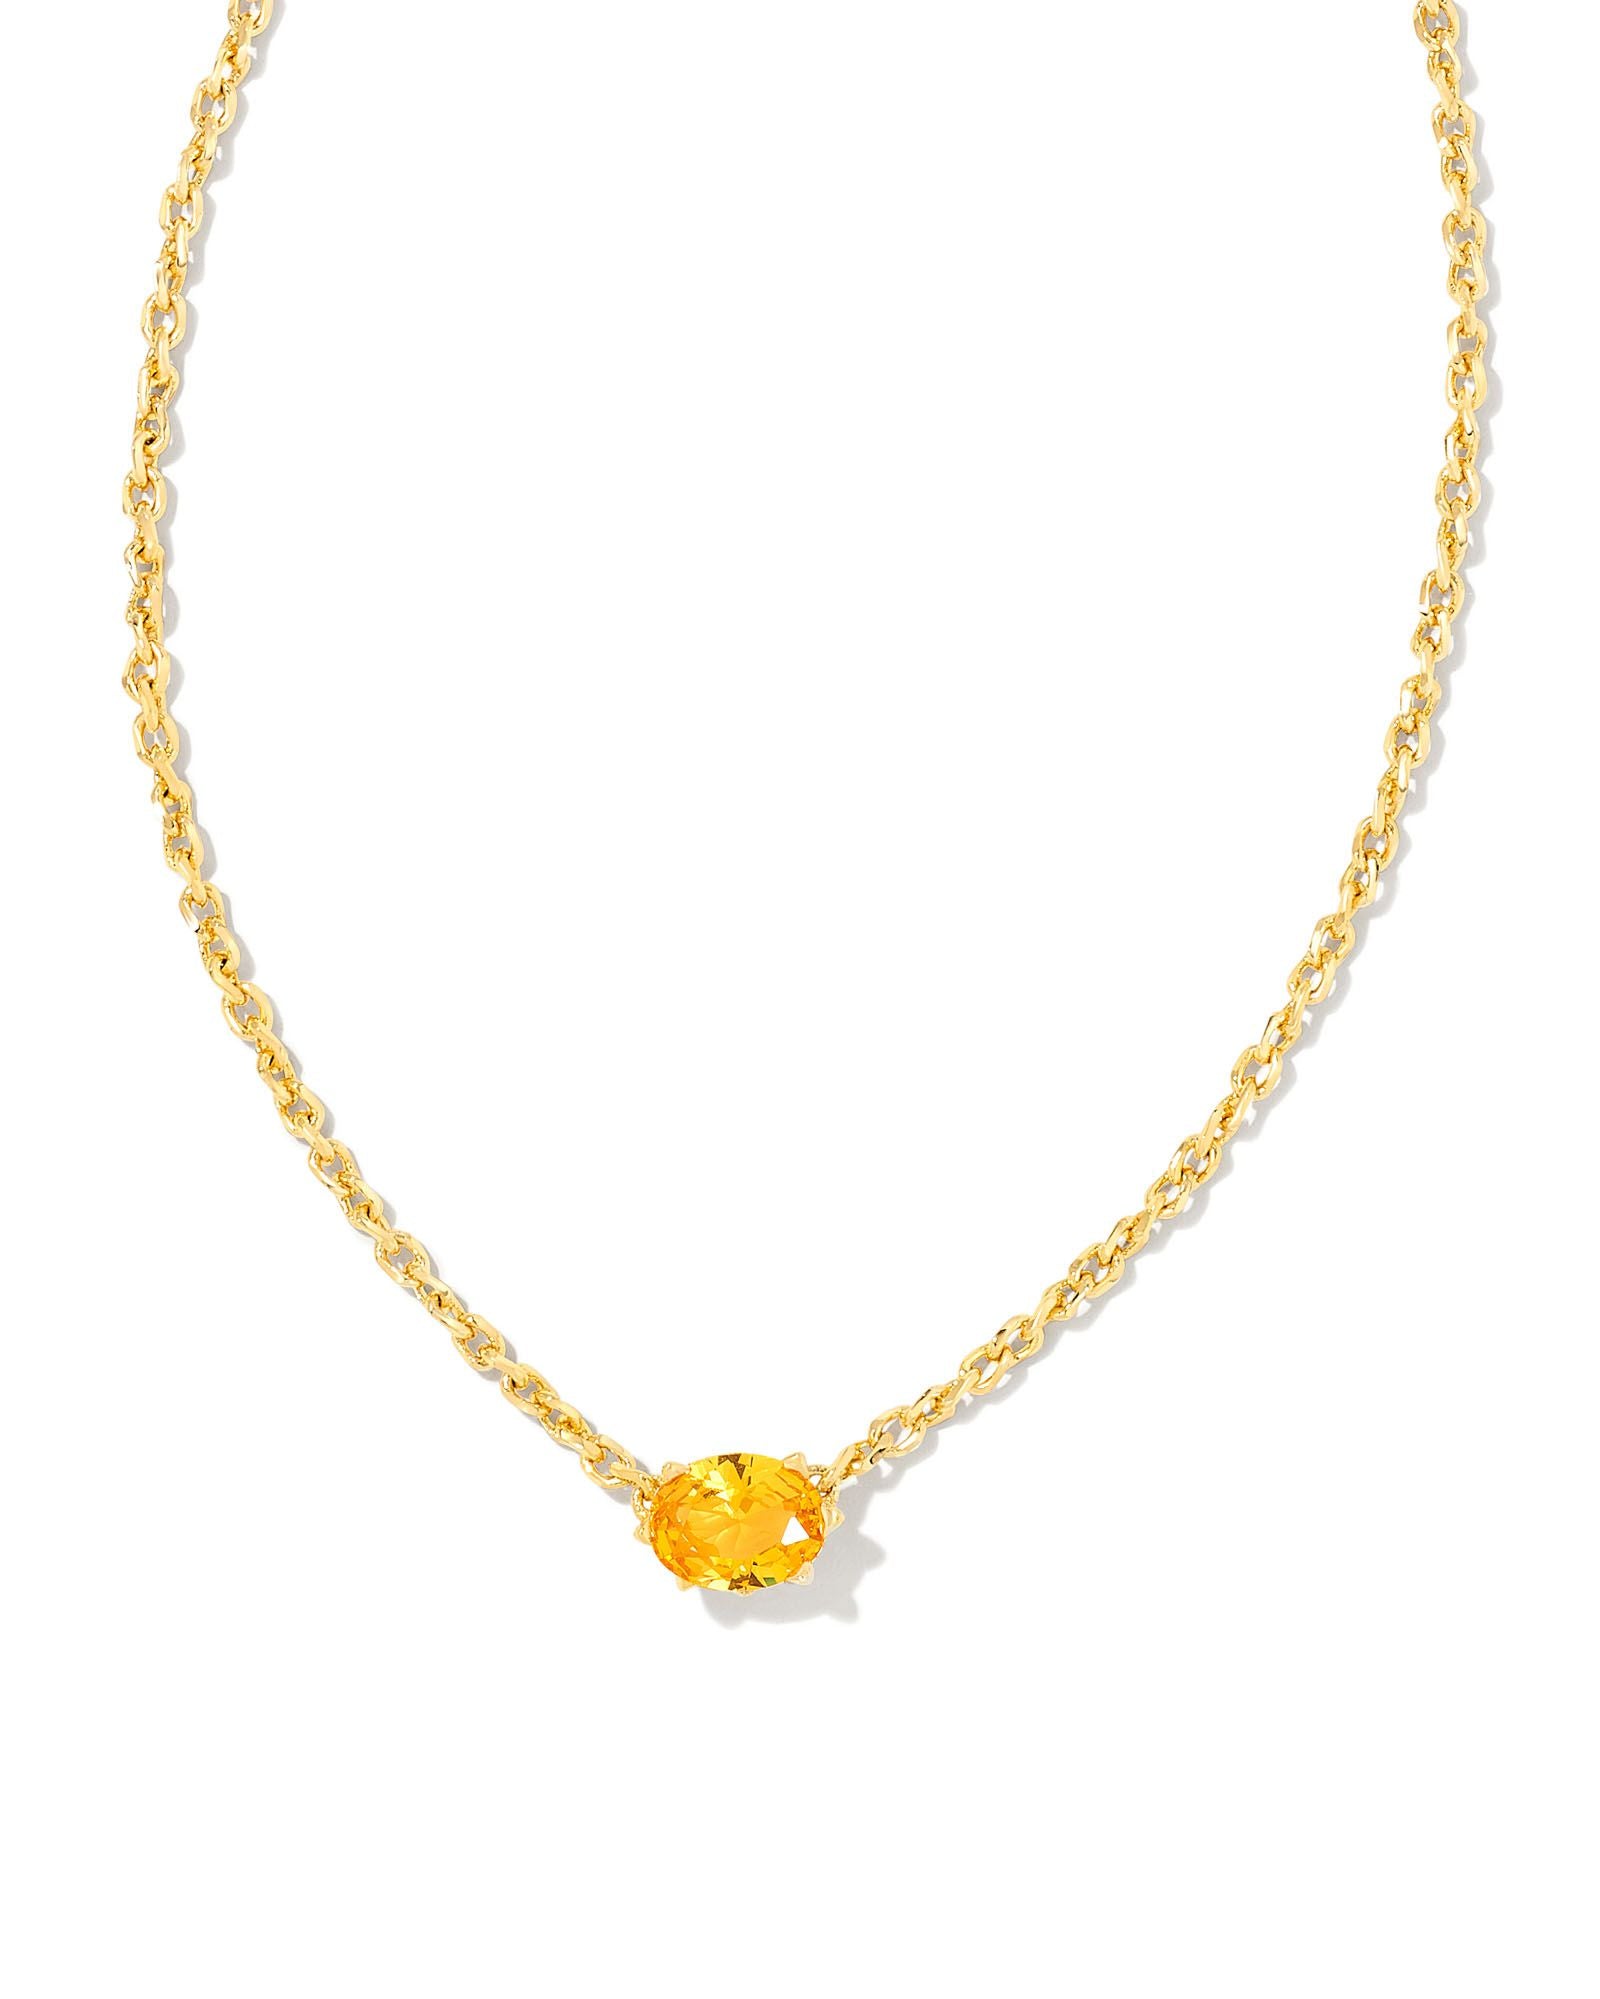 Kendra Scott Cailin Crystal Pendant Necklace In Gold Golden Yellow Crystal.